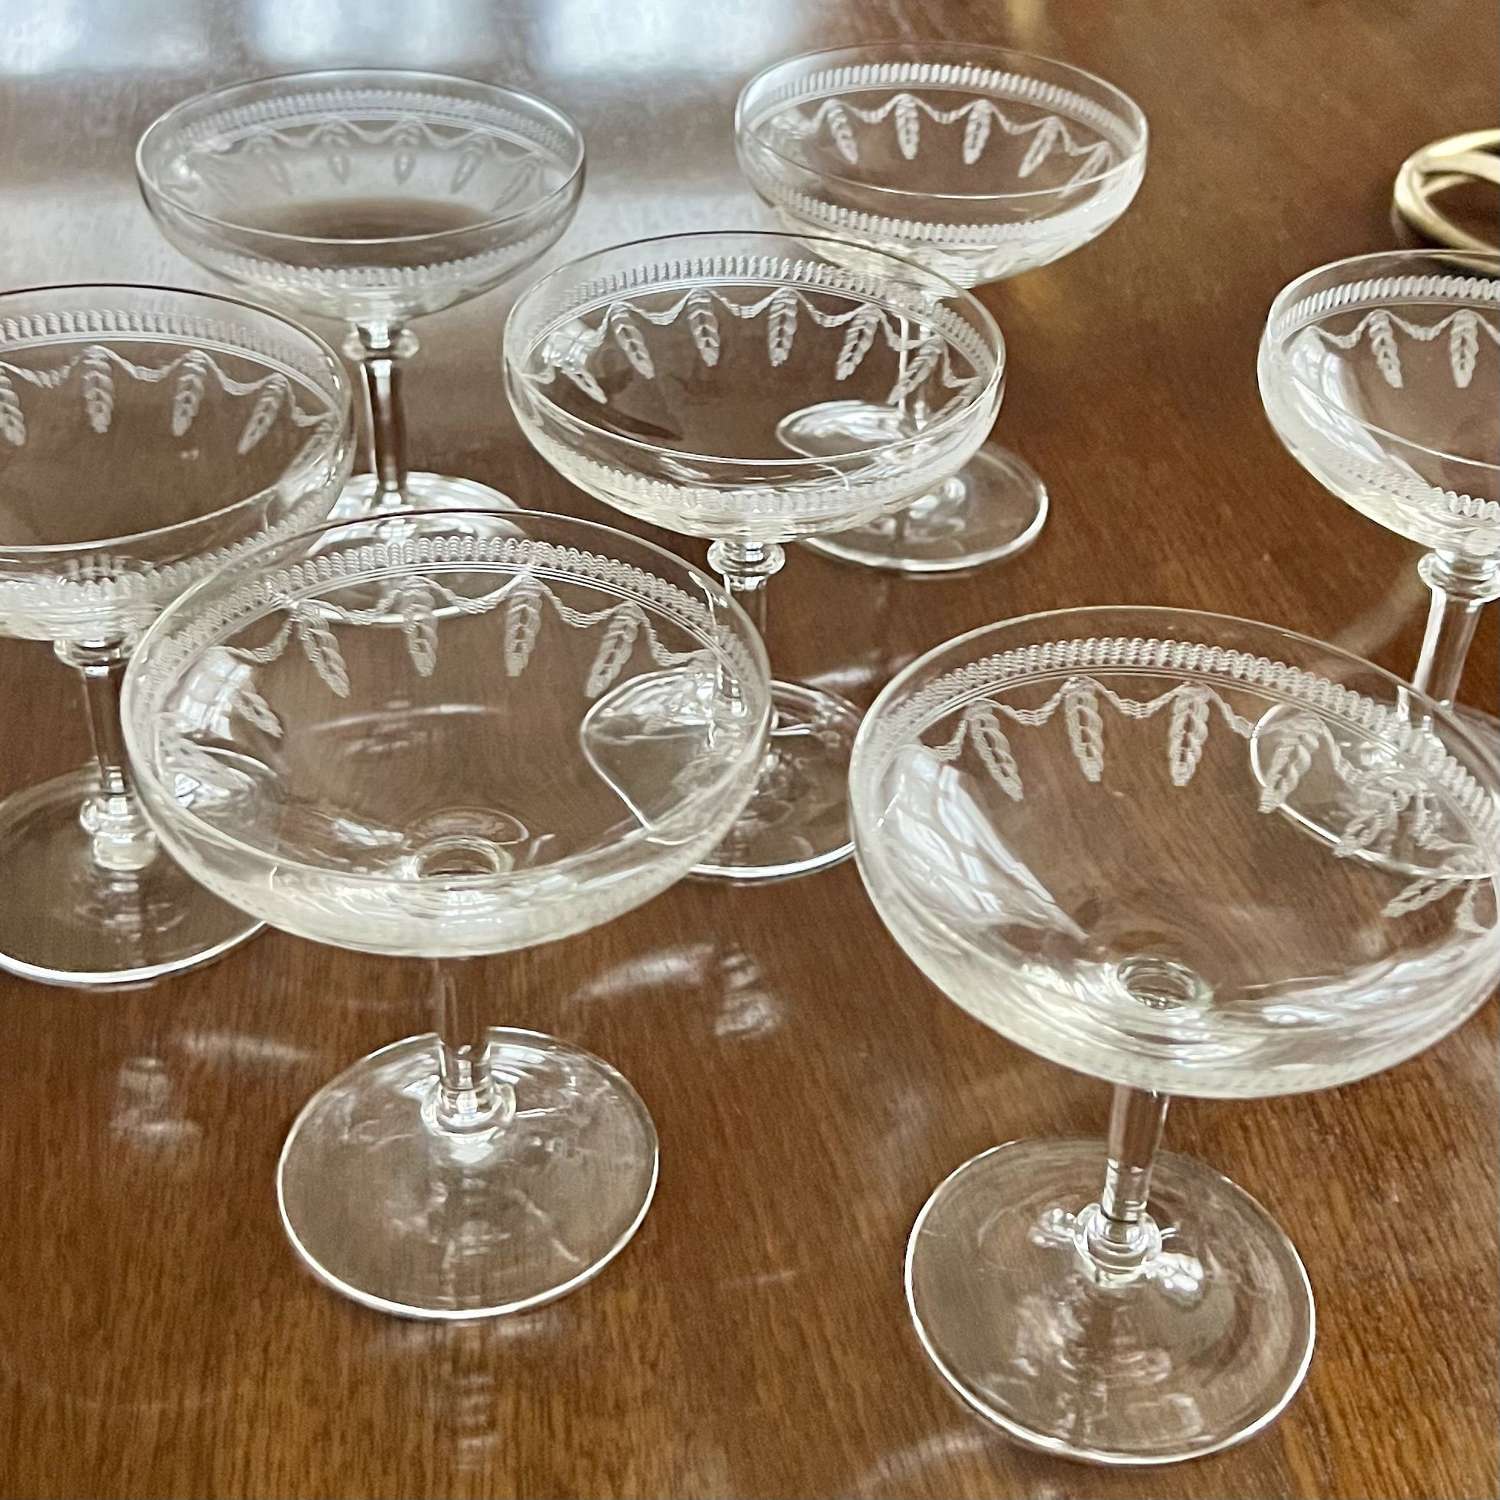 Pretty set of Edwardian Needle Etched Champagne Coupes